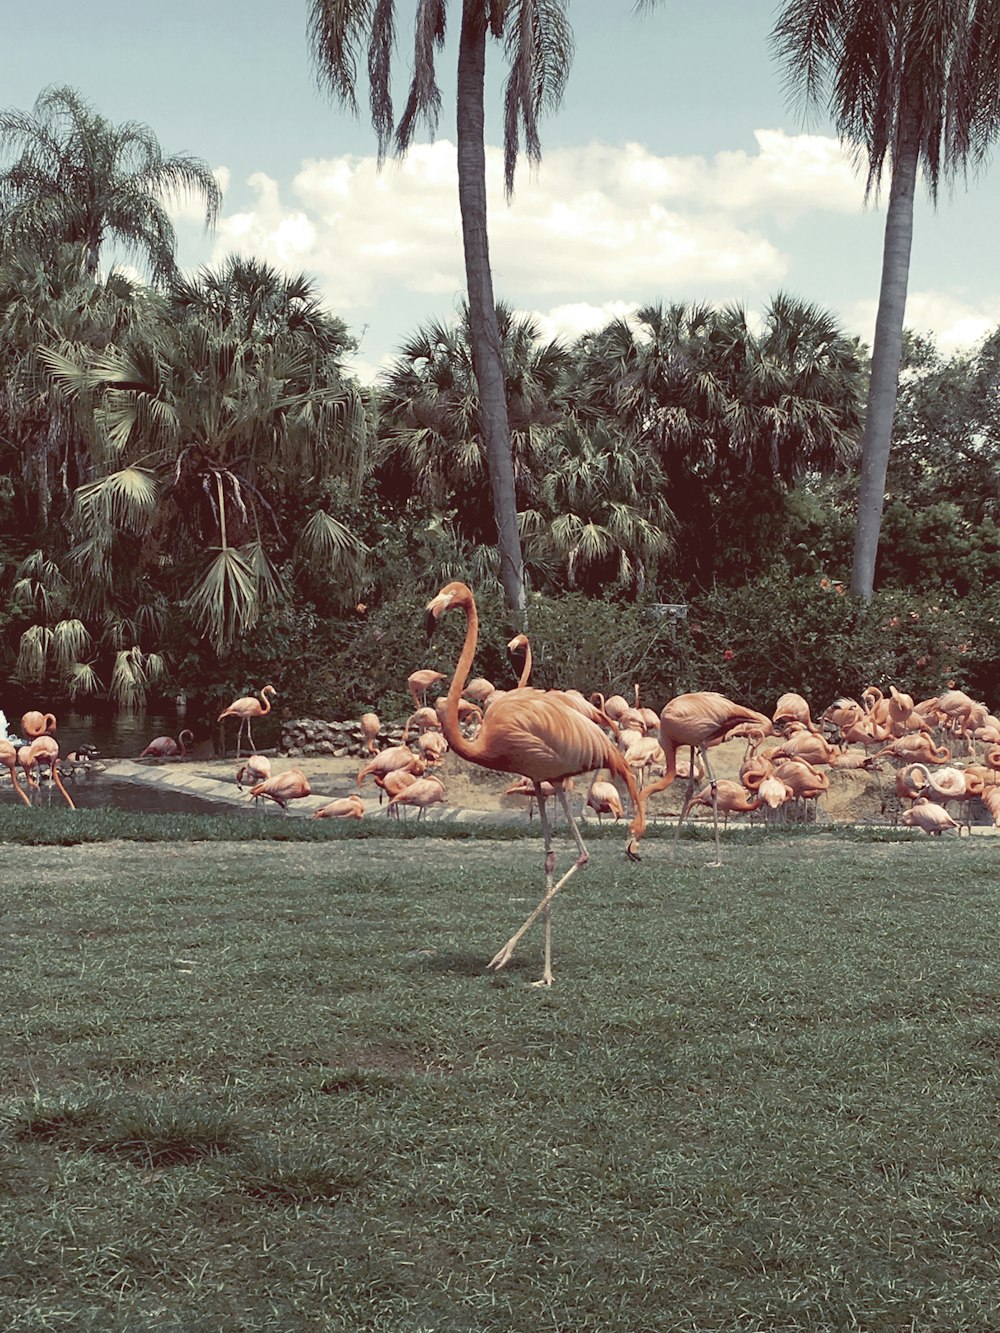 flock of flamingos on green grass field during daytime